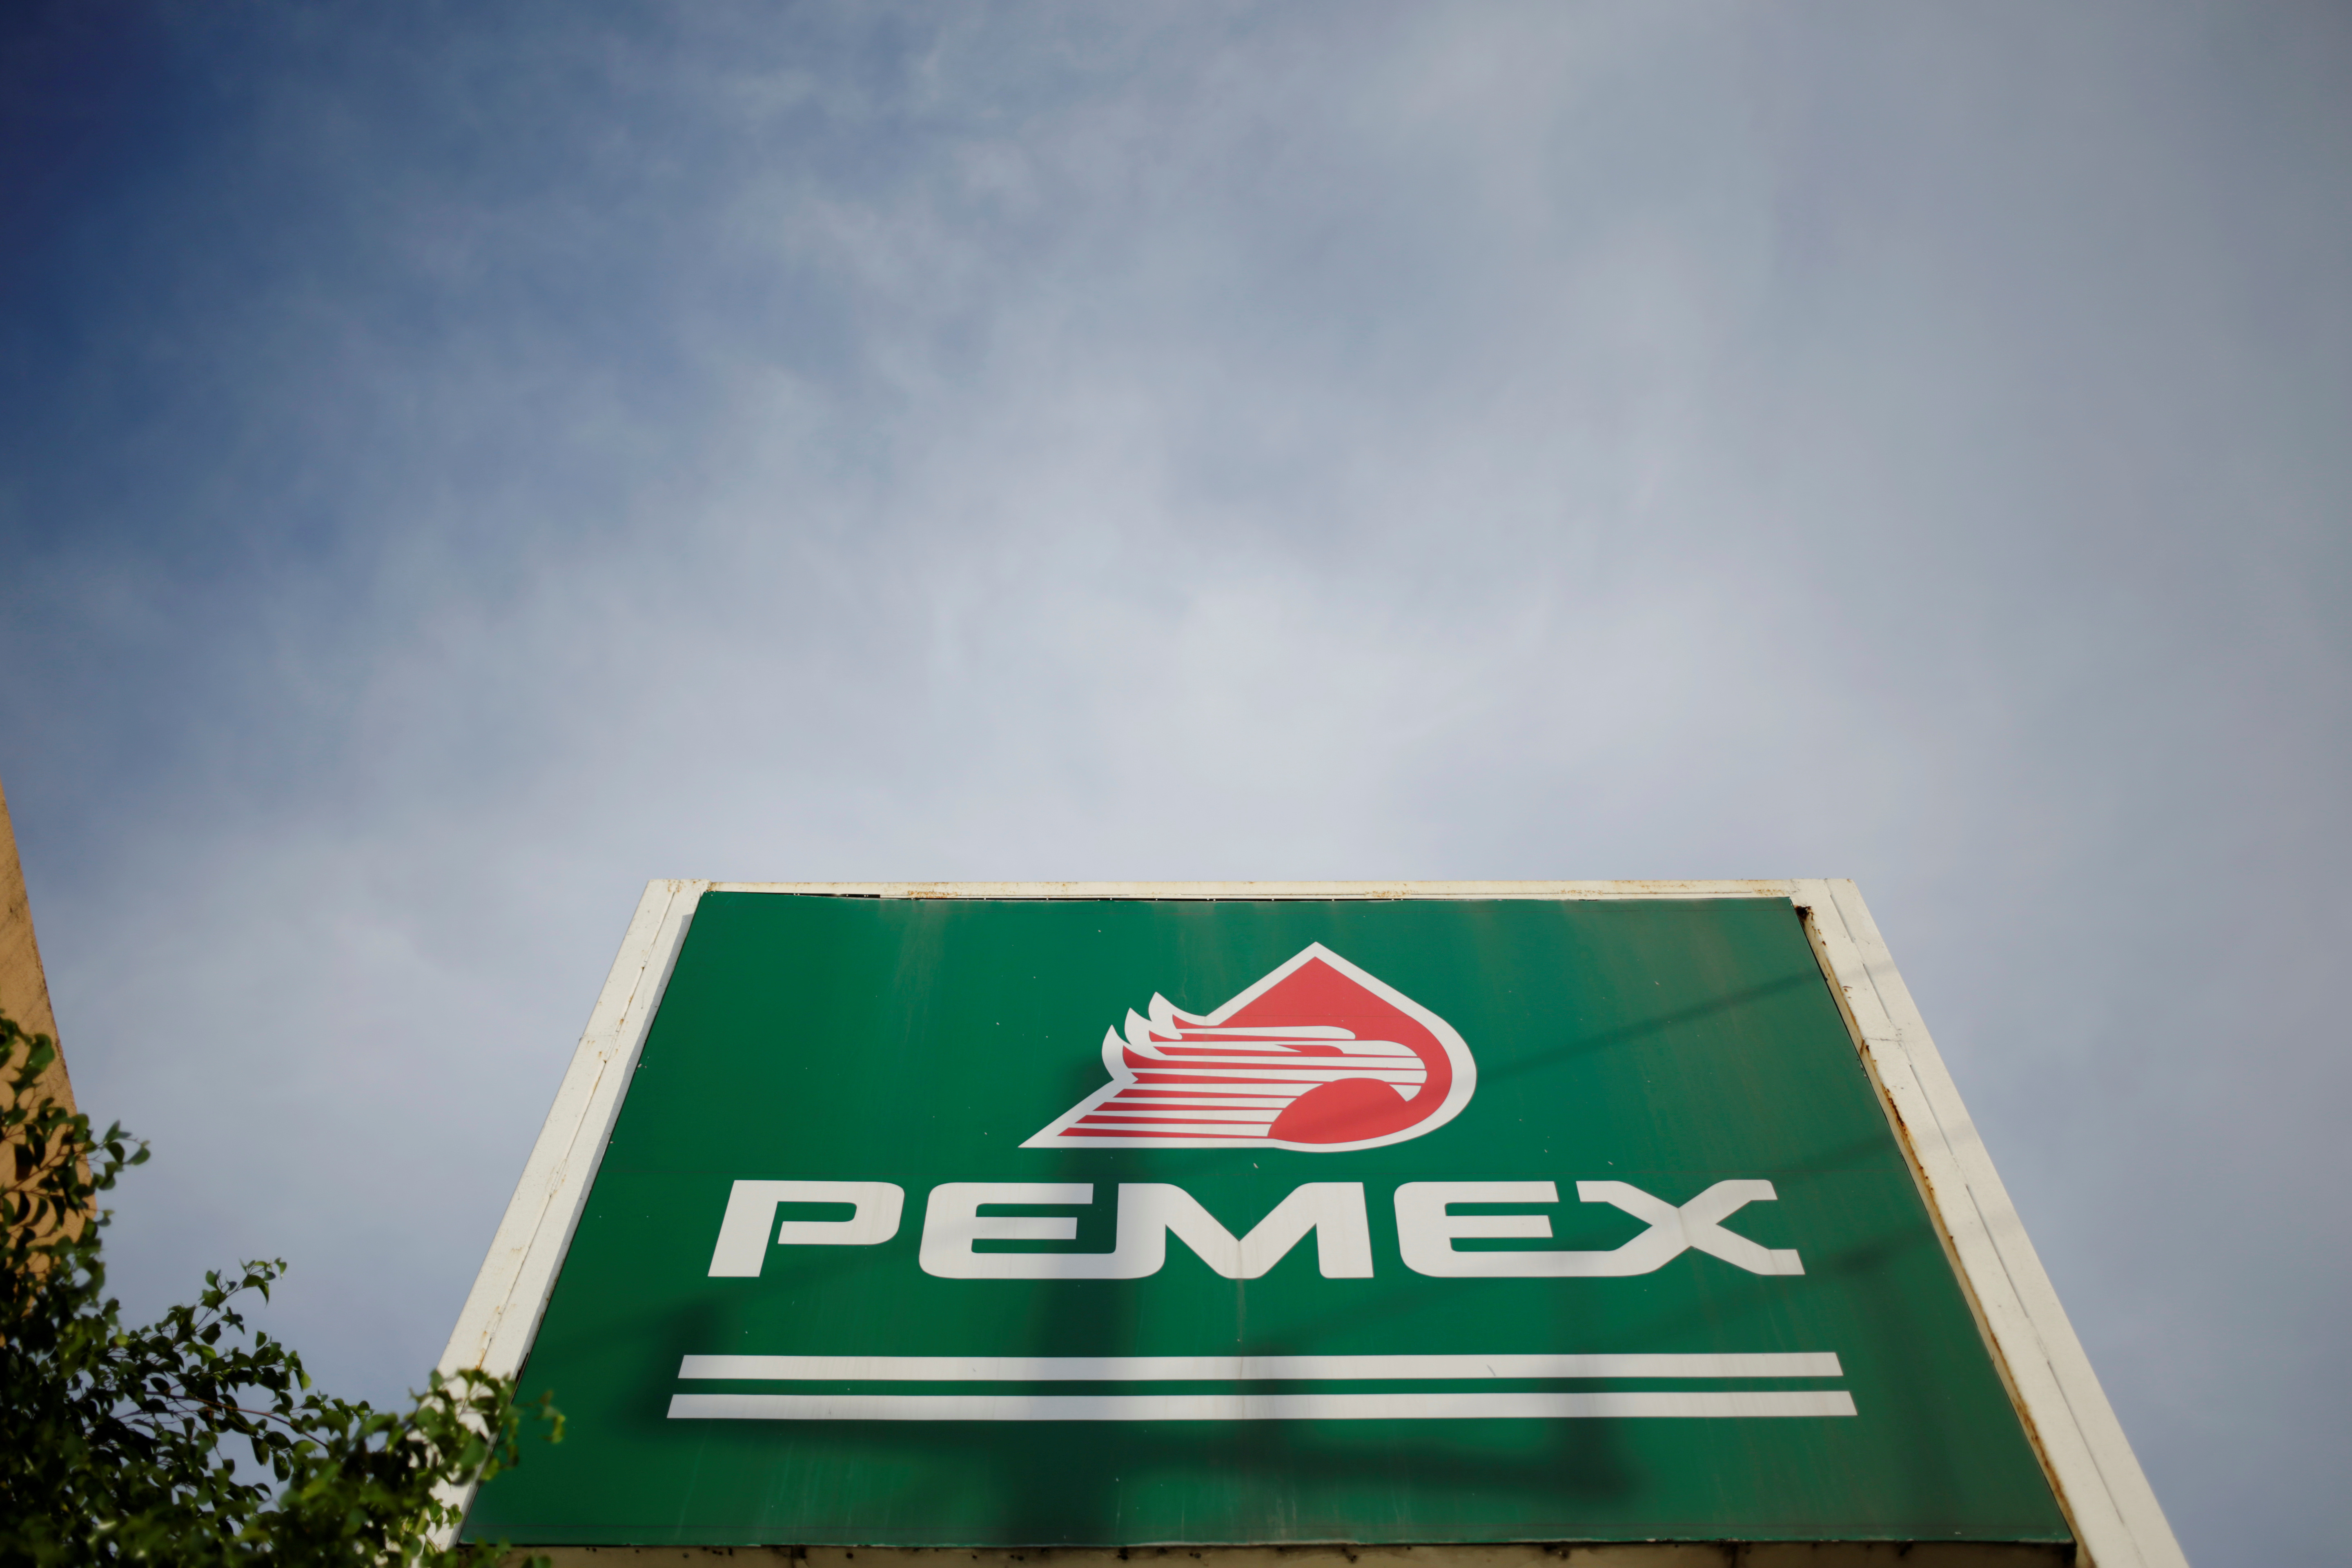 A sign of state-owned company Petroleos Mexicanos PEMEX is seen at a gas station in Monterrey